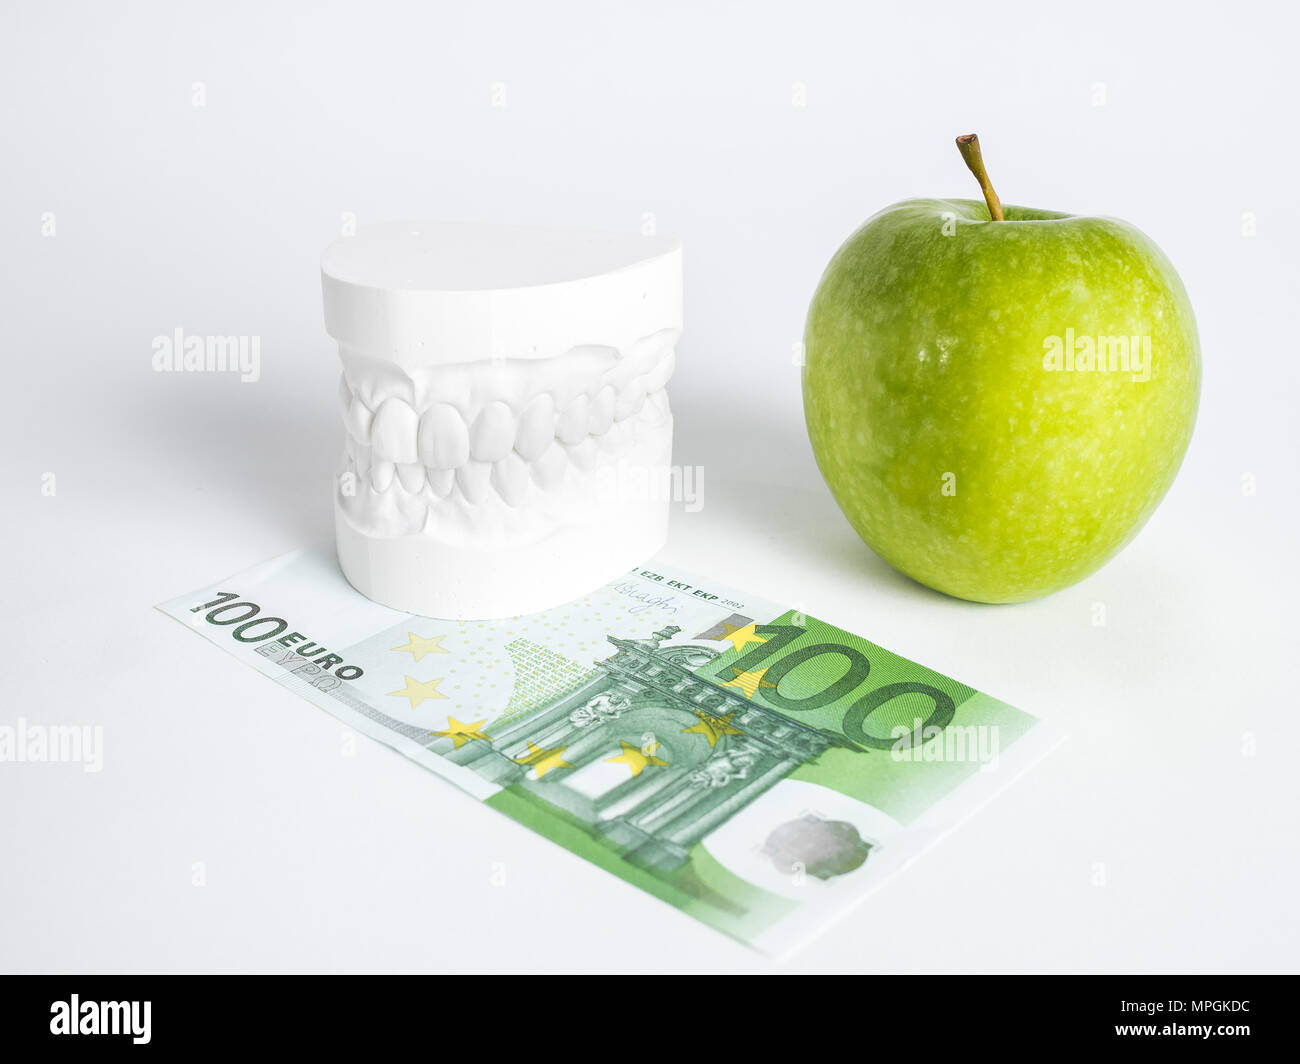 The green apple, the denture and the one hundred euro bill isolated close up Stock Photo